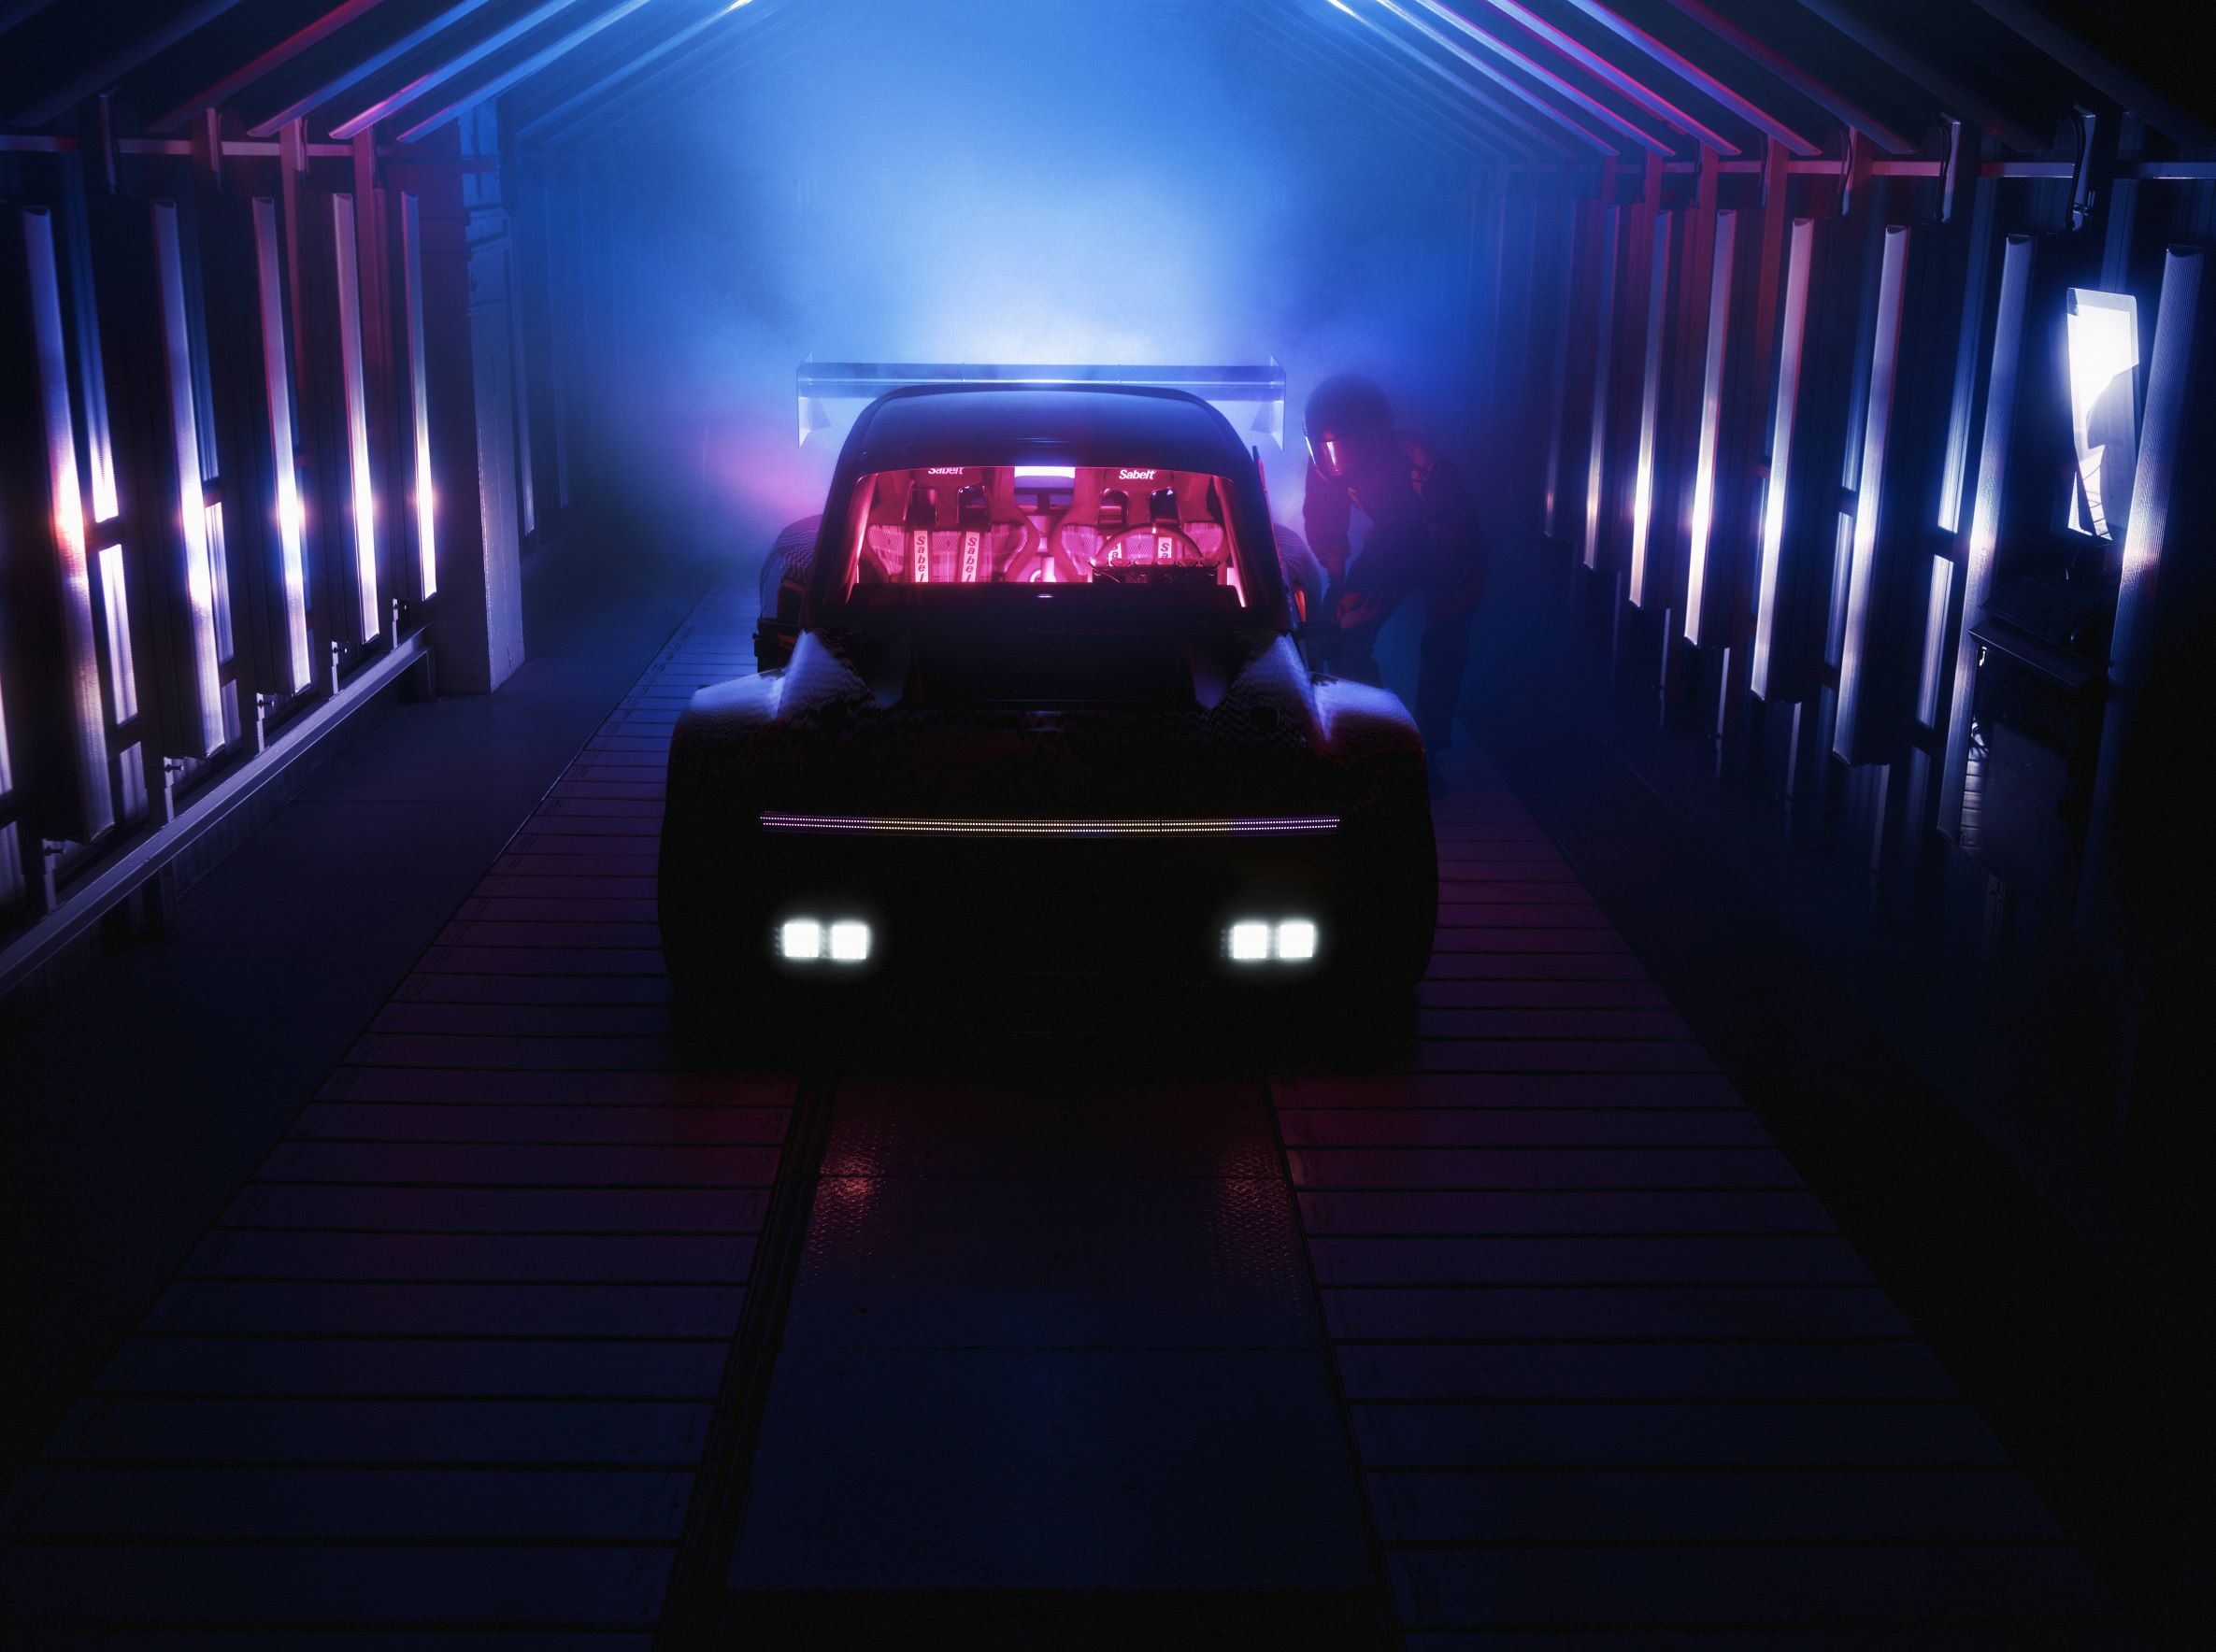 Frontal view of a teaser version of the fully electric Renault 5 show car